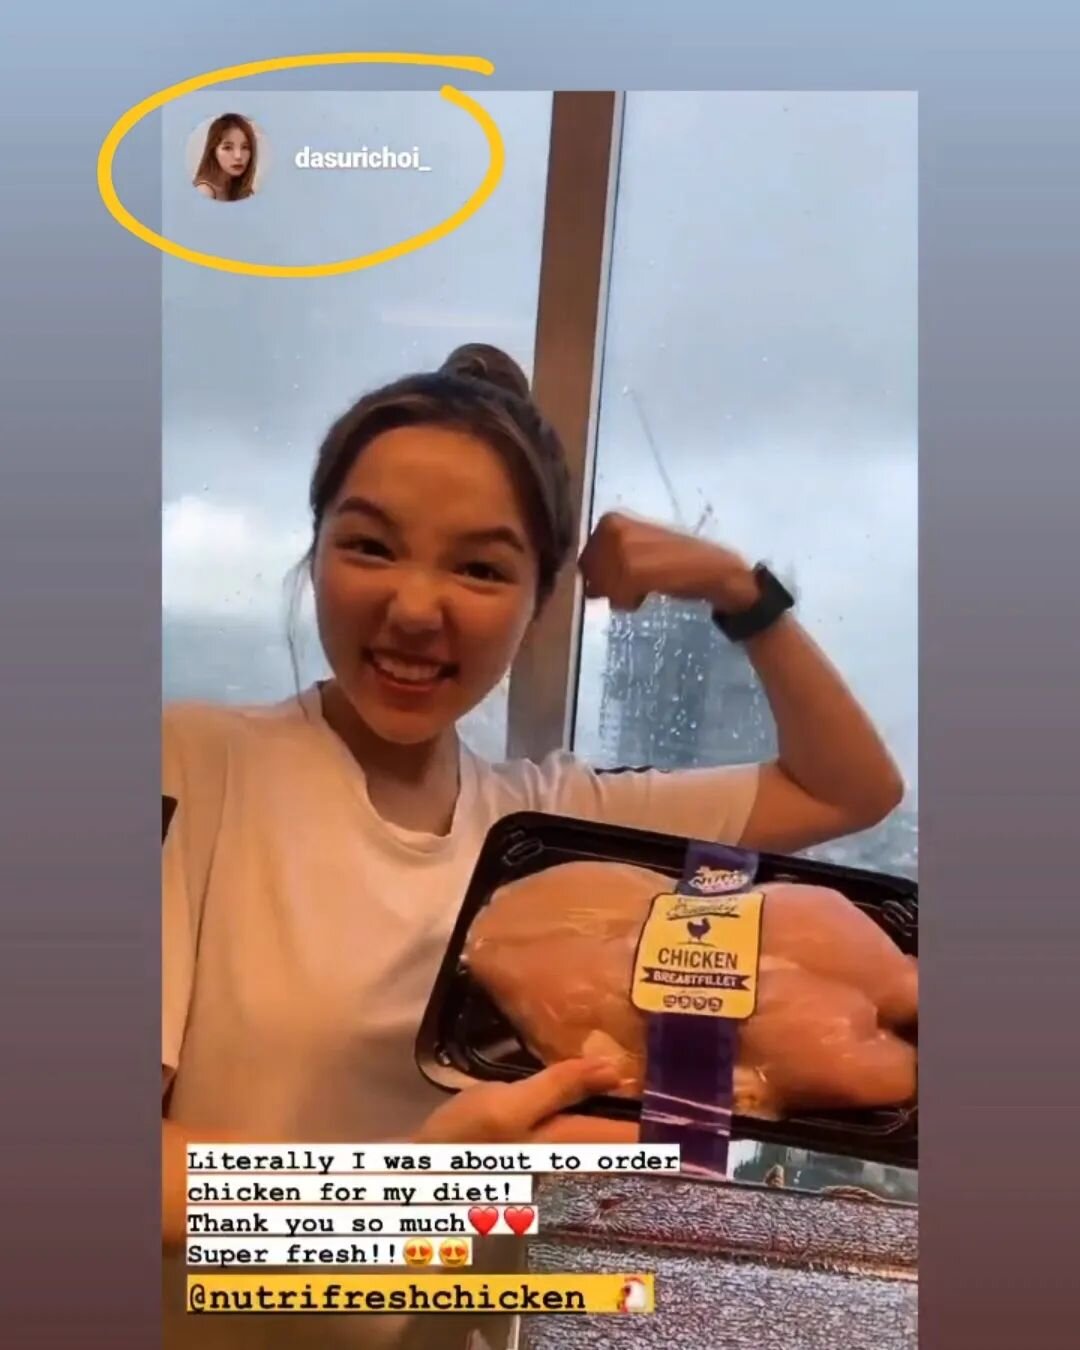 Thank you Ms. Dasuri Choi 💜

Don't froget to Download our APP to order⬇️
https://nutrifresh.onelink.me/hDfI

🔹️09258228118
🔹️www.nutrifreshchicken.com

#EatHealthyEatFresh

*Available in Metro Manila only.